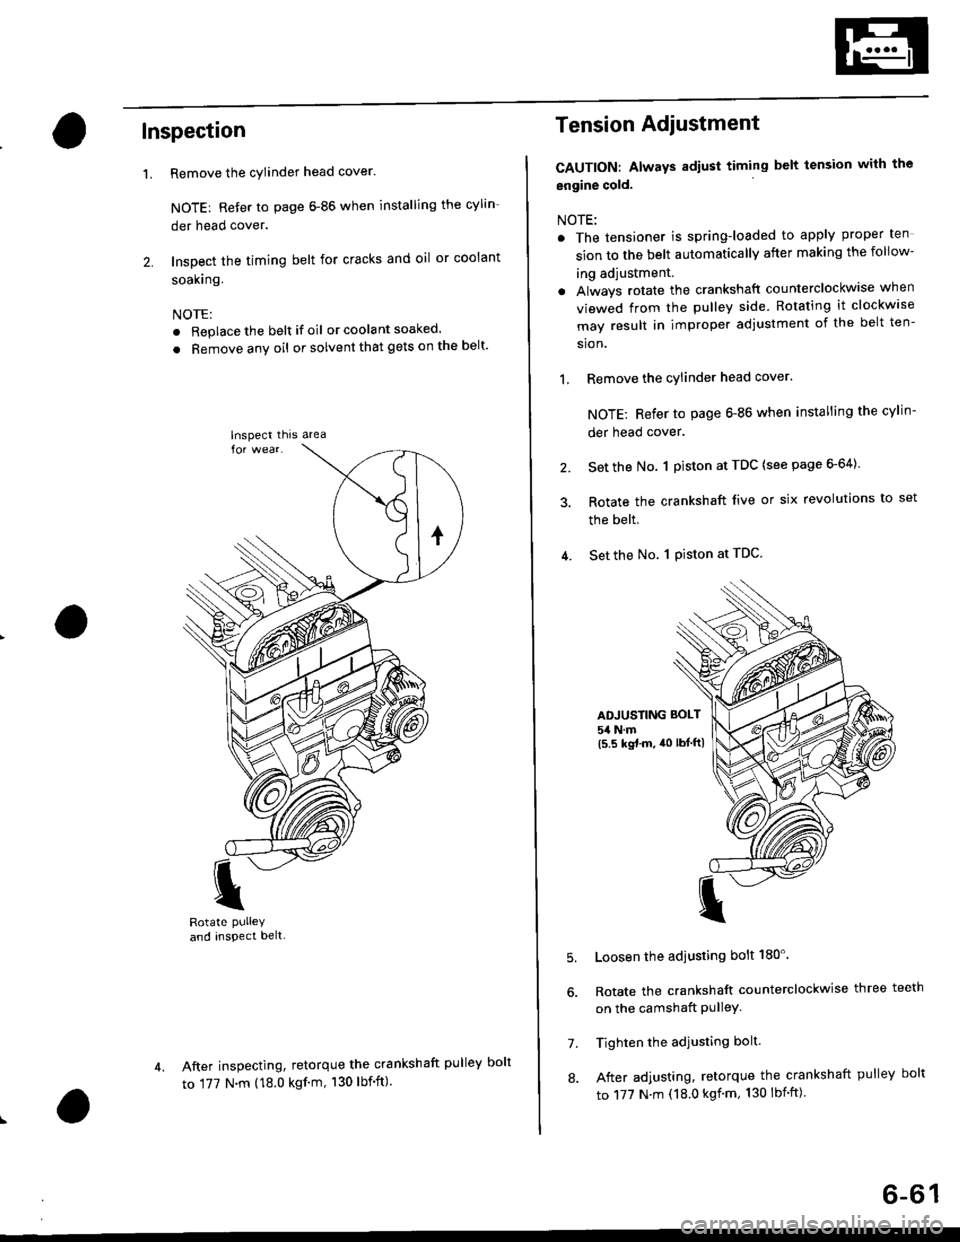 HONDA CIVIC 2000 6.G Workshop Manual Inspection
Remove the cylinder head cover.
NOTE: Refer to page 6-86 when installing the cylin-
der head cover.
Inspect the timing belt for cracks and oil or coolant
soakrng.
NOTE:
. Replace the belt i